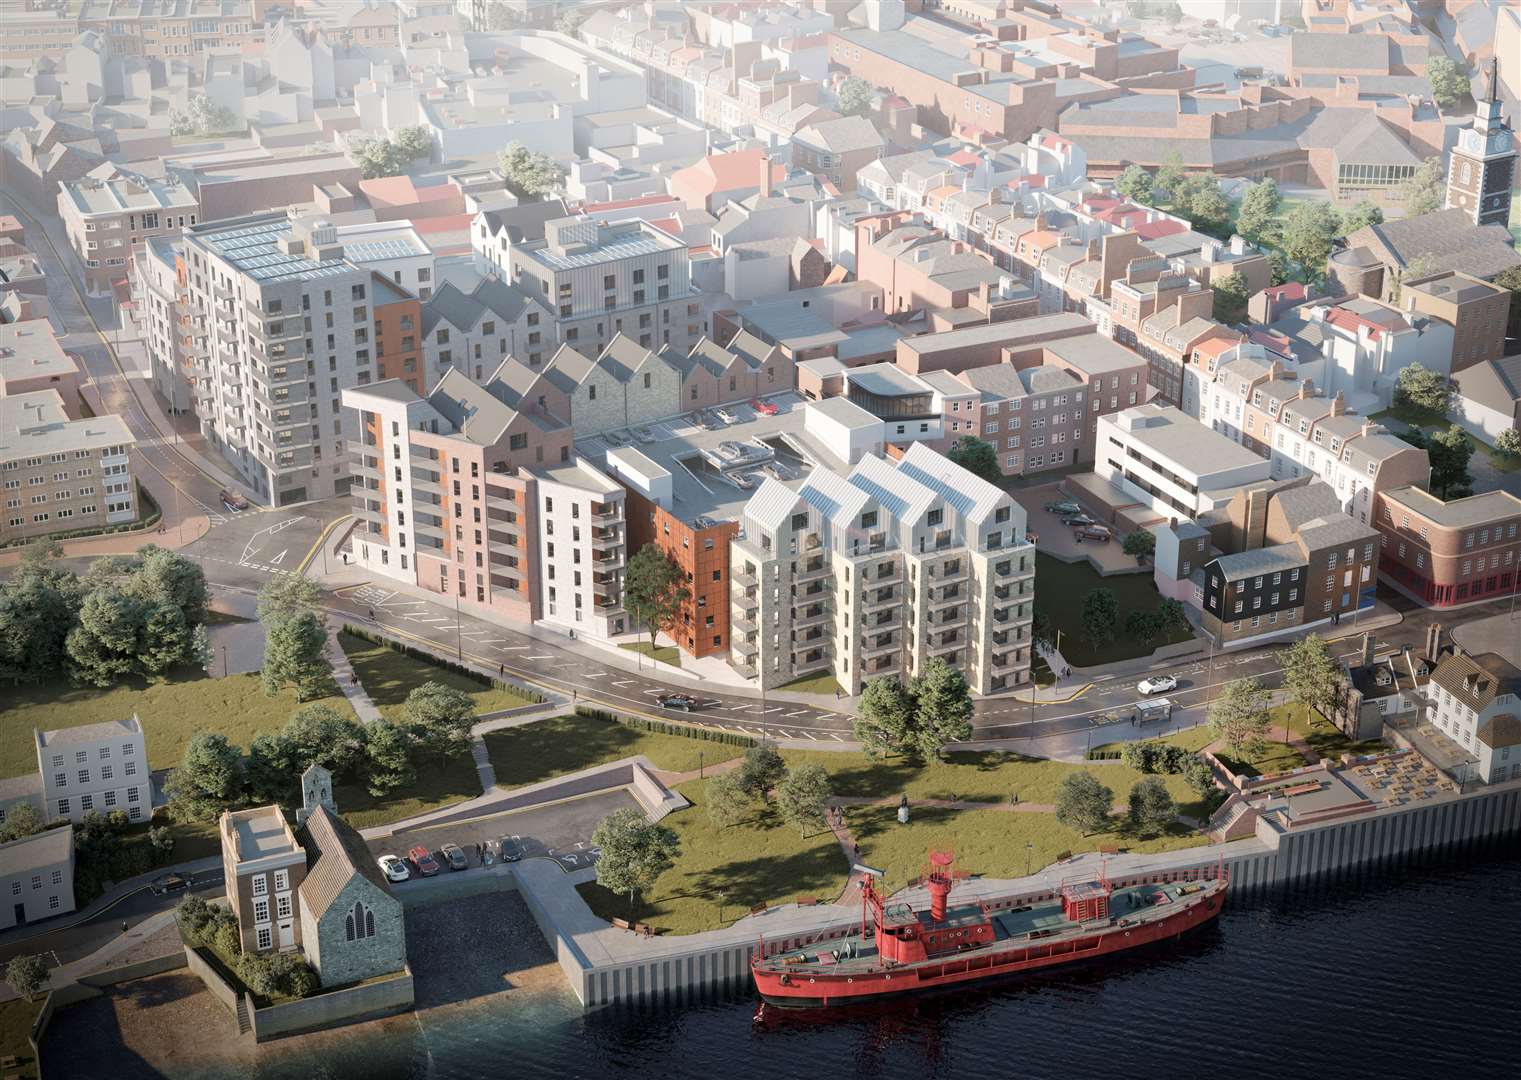 What the project will look like once complete. Picture: Gravesham Borough Council